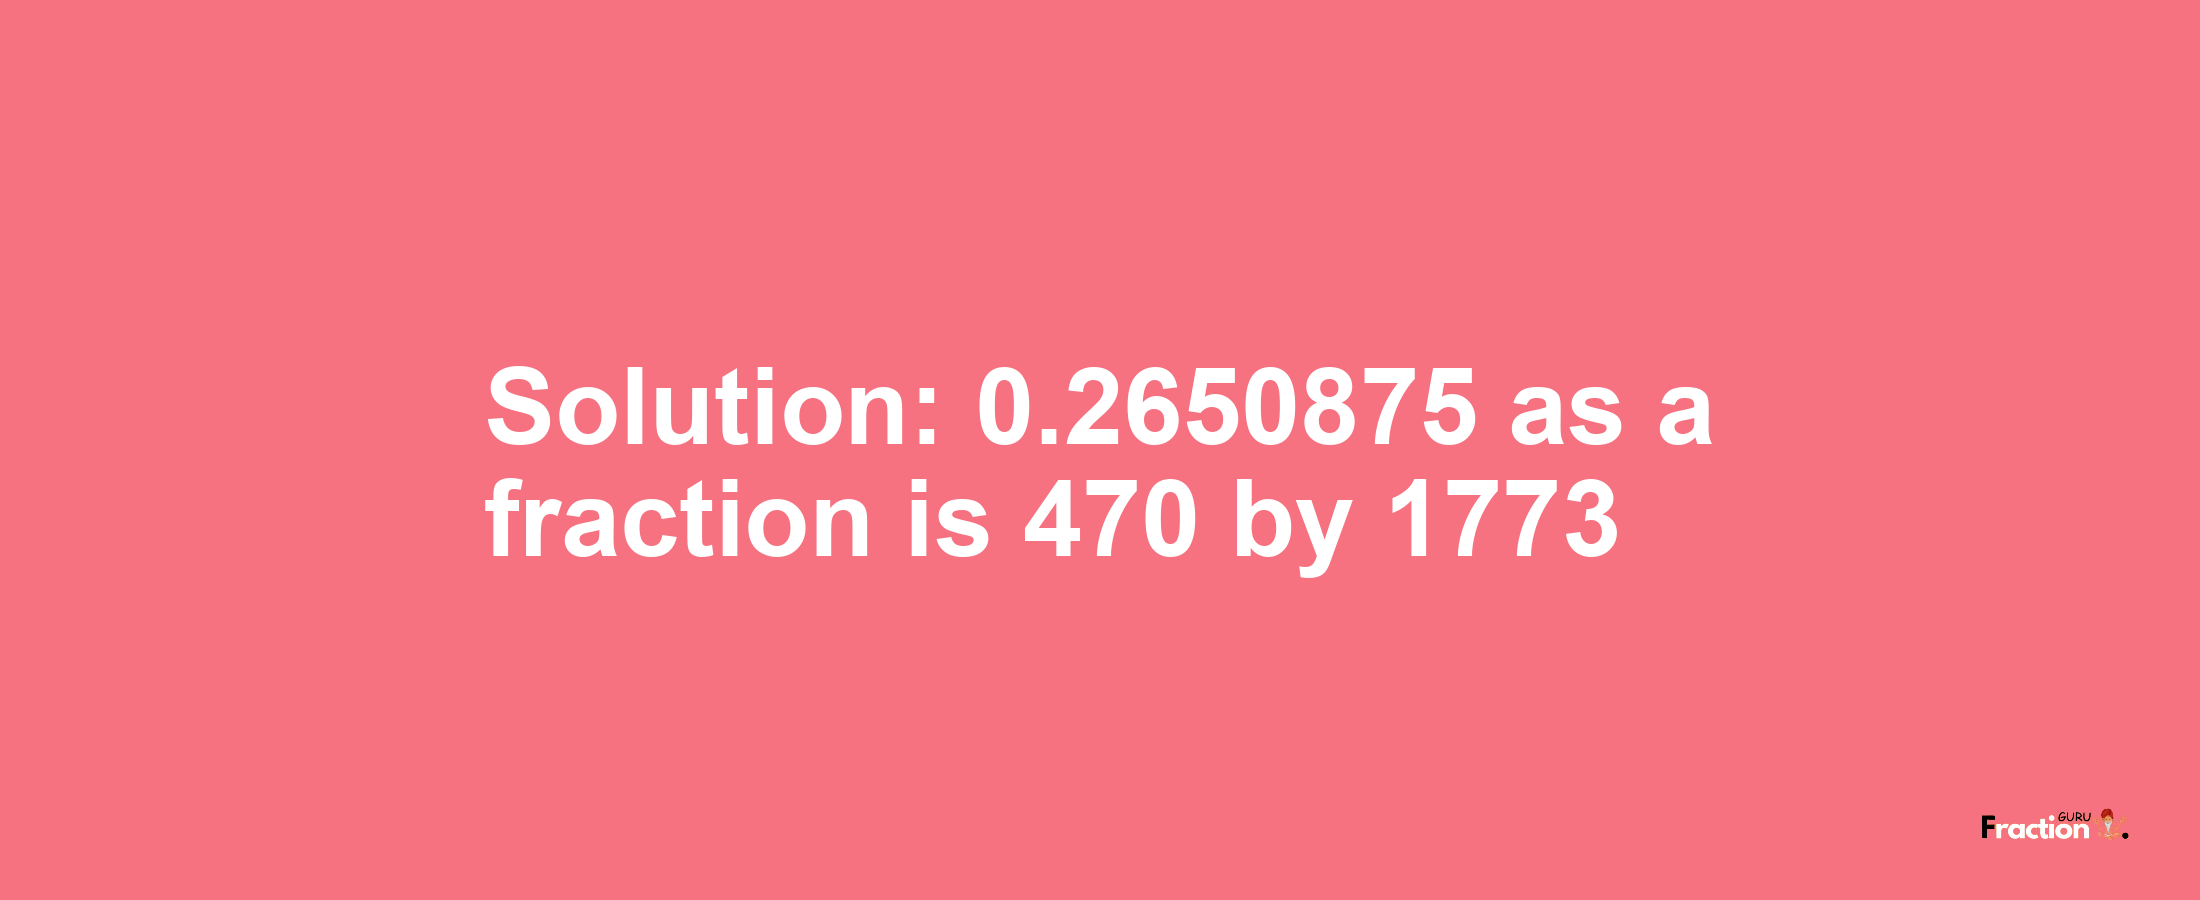 Solution:0.2650875 as a fraction is 470/1773